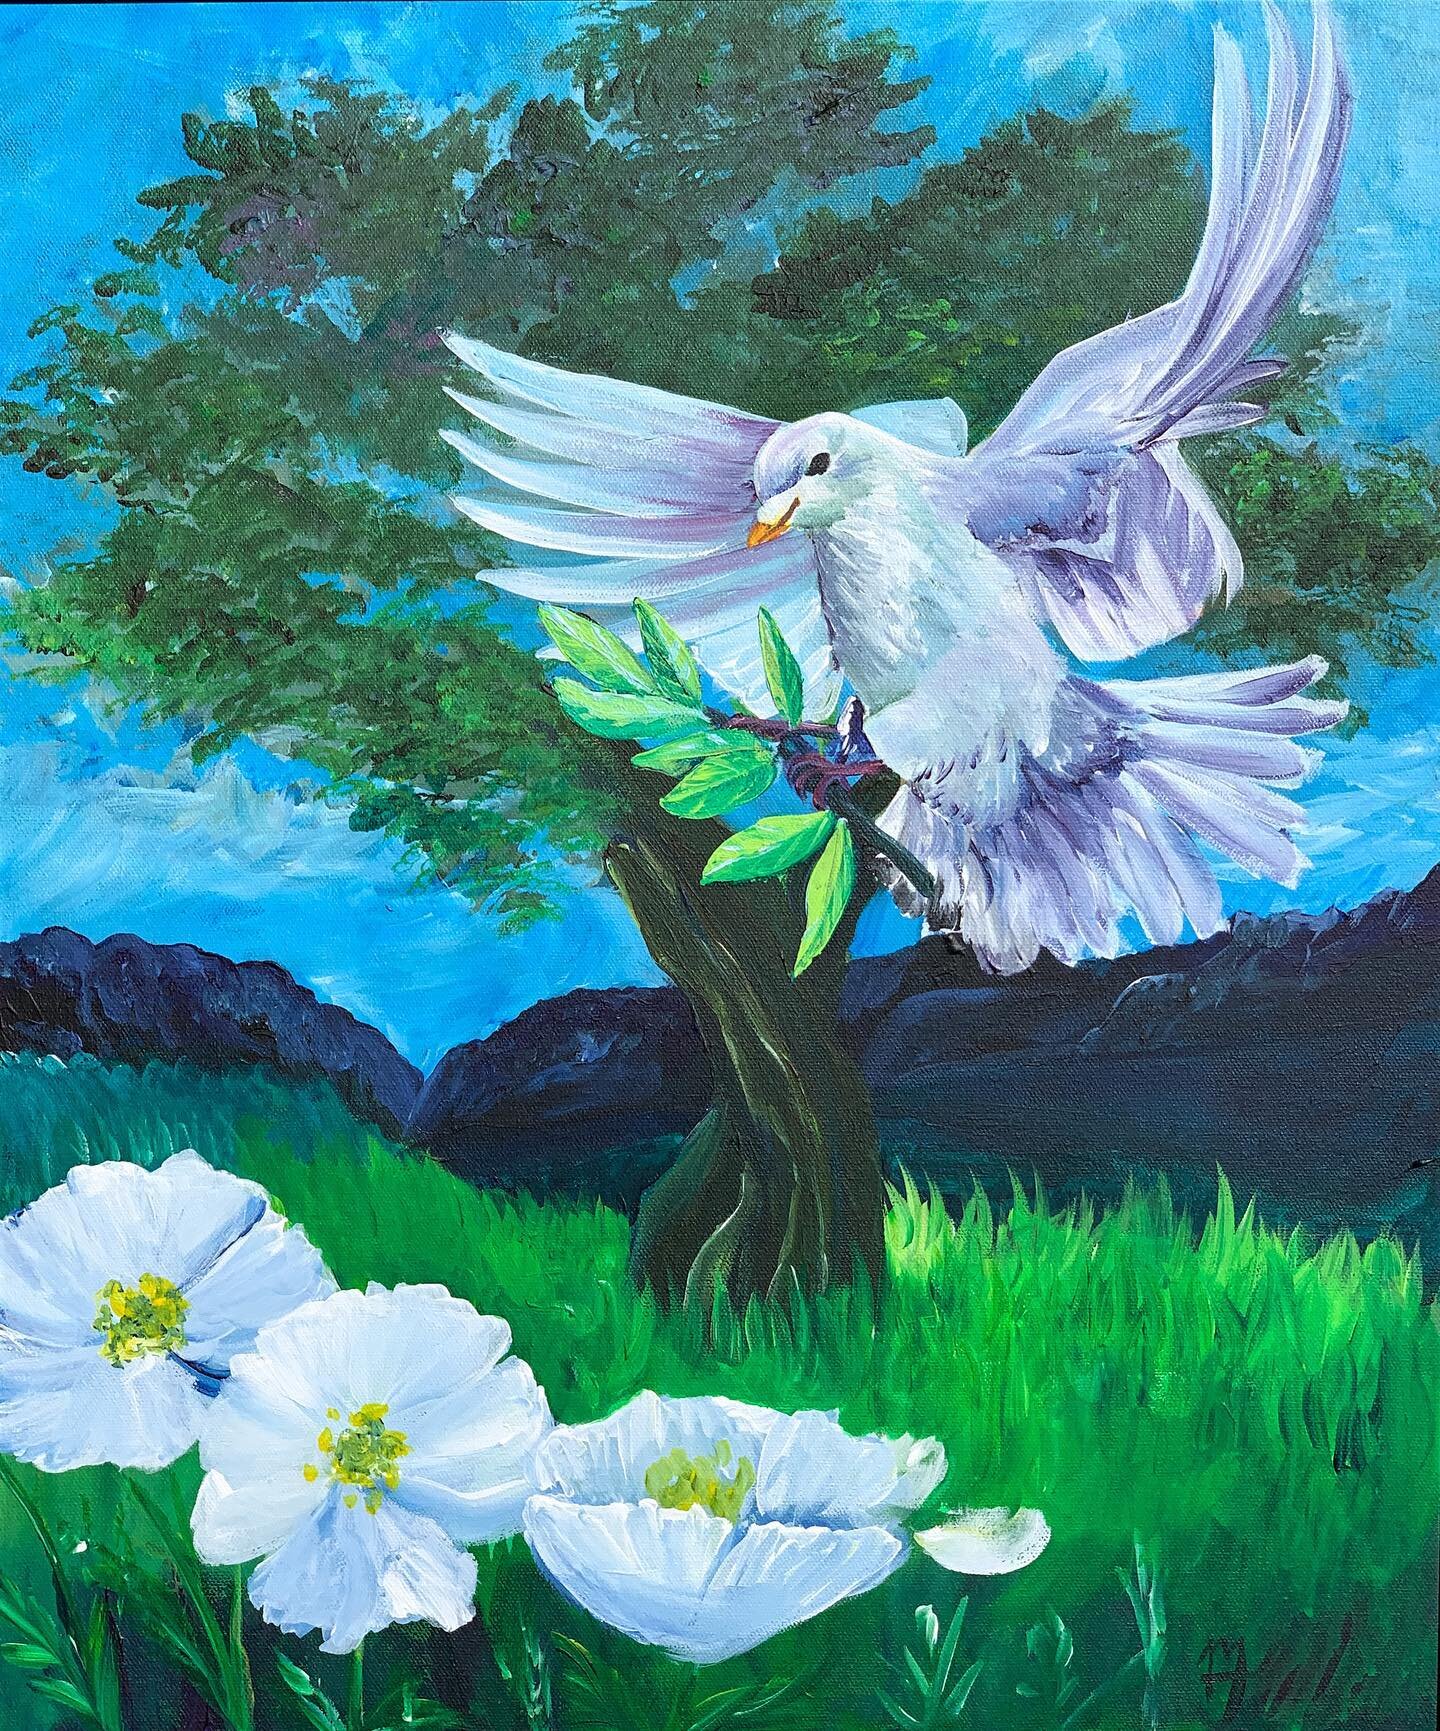 &ldquo;Peace&rdquo;
Acrylic on canvas
18x24&rdquo;

I painted this @escondidochristian during the second Encounter Room. I meant to have a sketch this time, but nothing was working! In fact, it was the kind of day where nothing was working well, for 